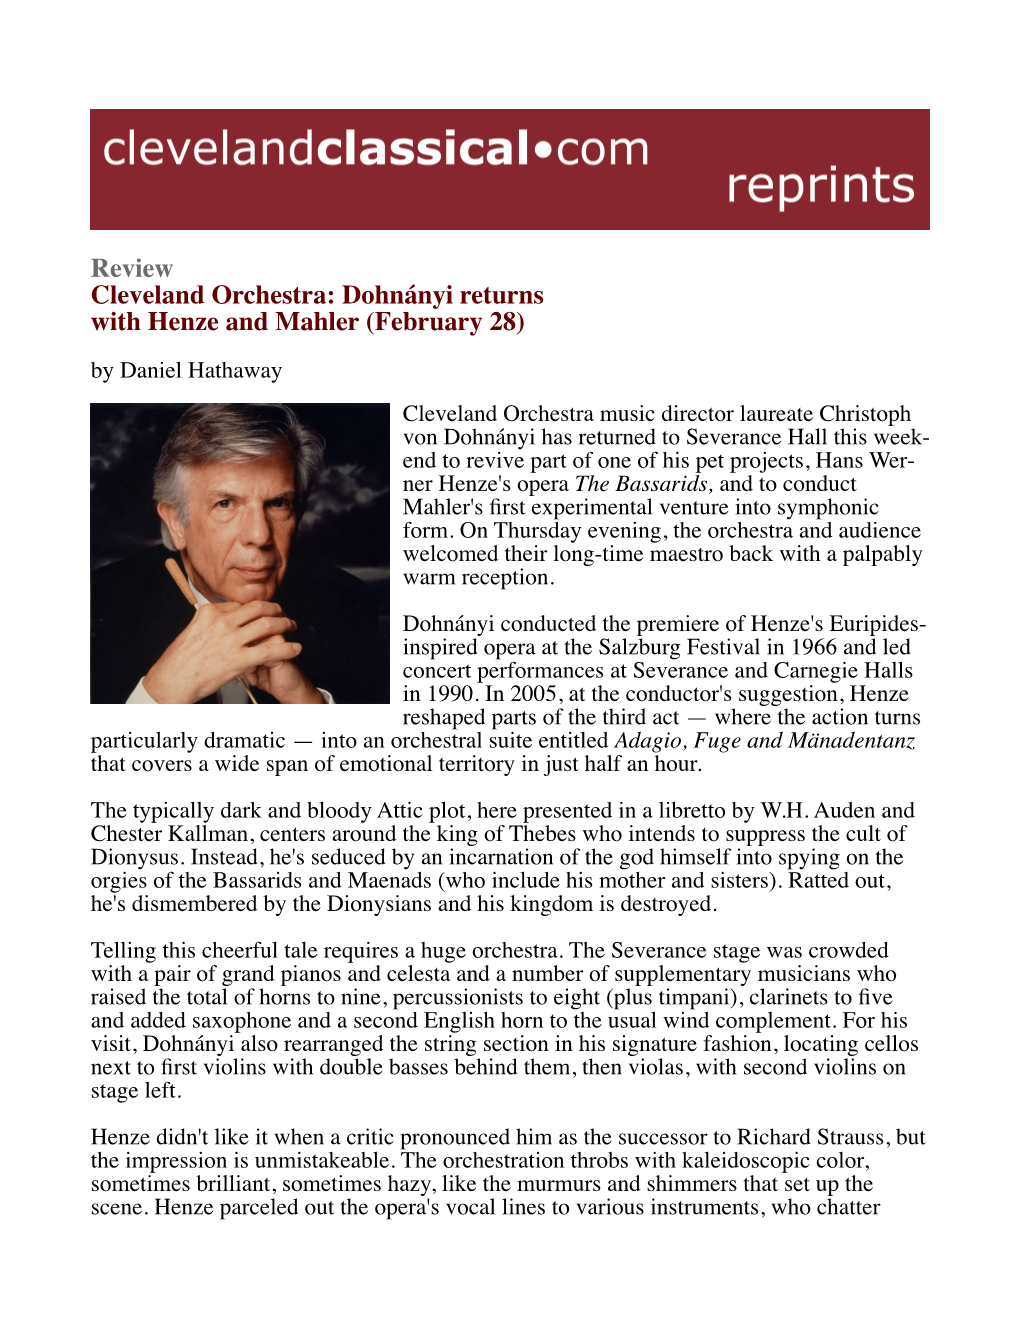 Review Cleveland Orchestra